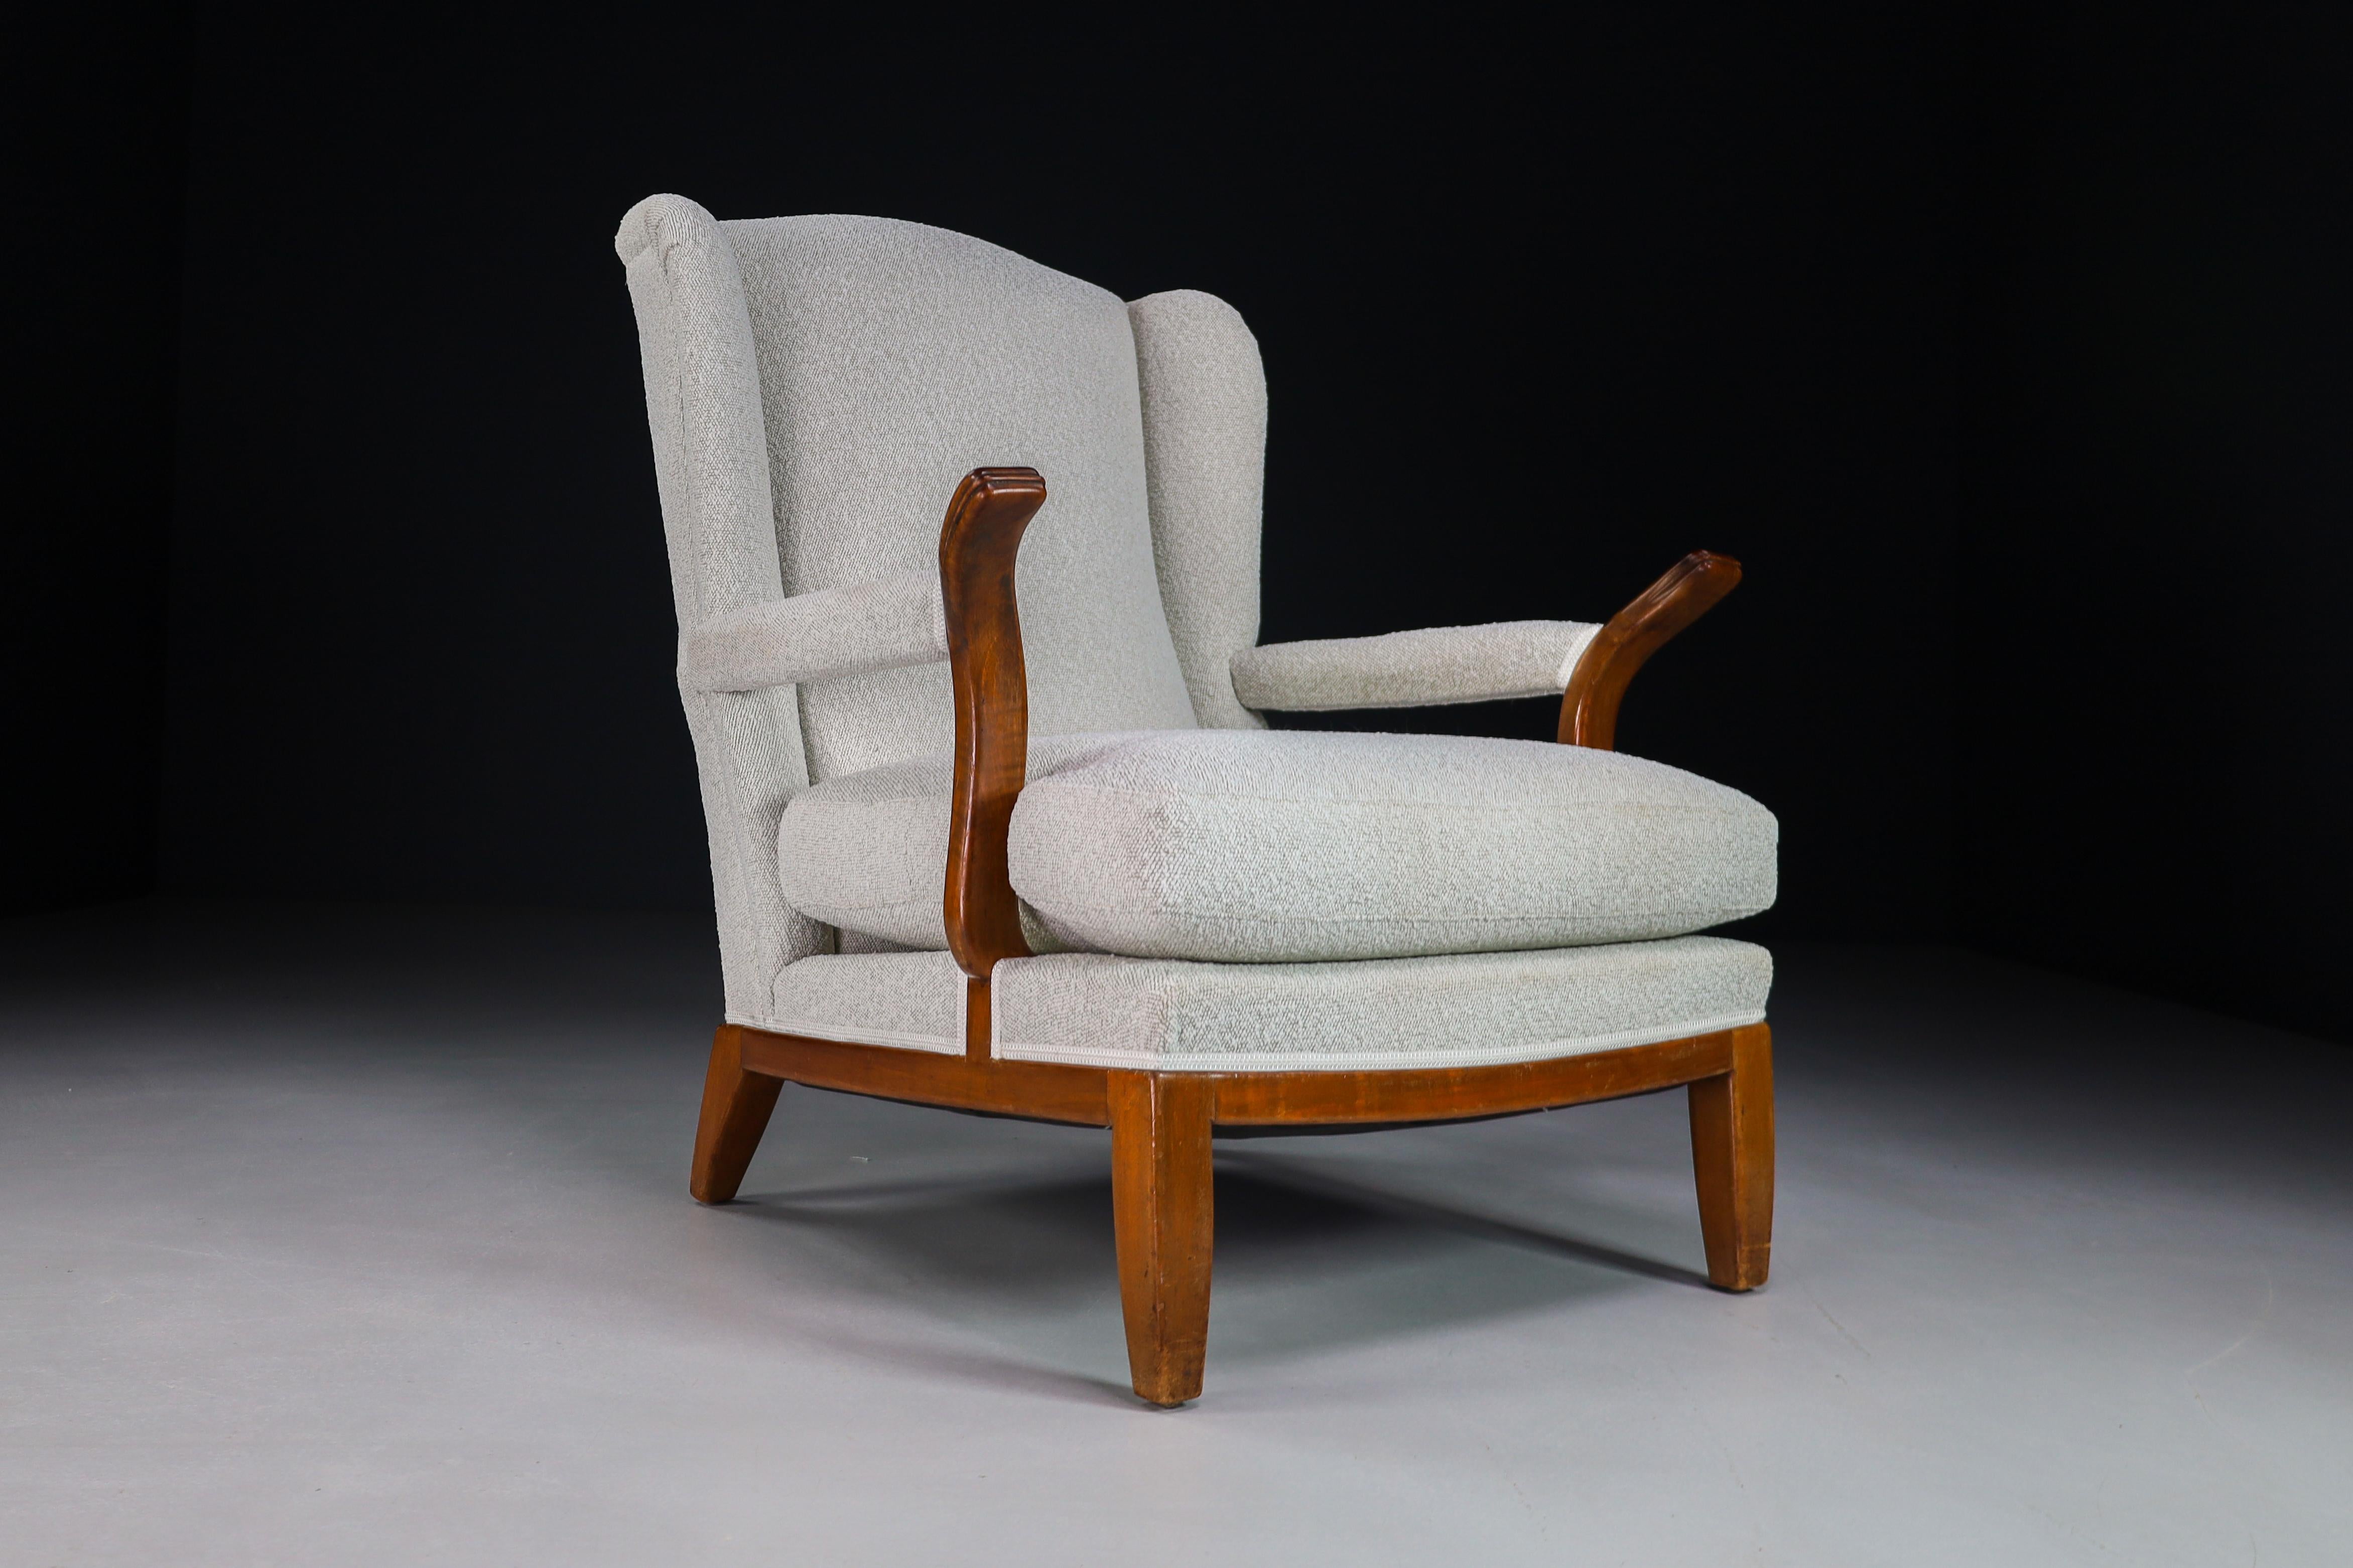 Large Wingback Chair in Walnut and New Bouclé Fabric, France, 1930s For Sale 3